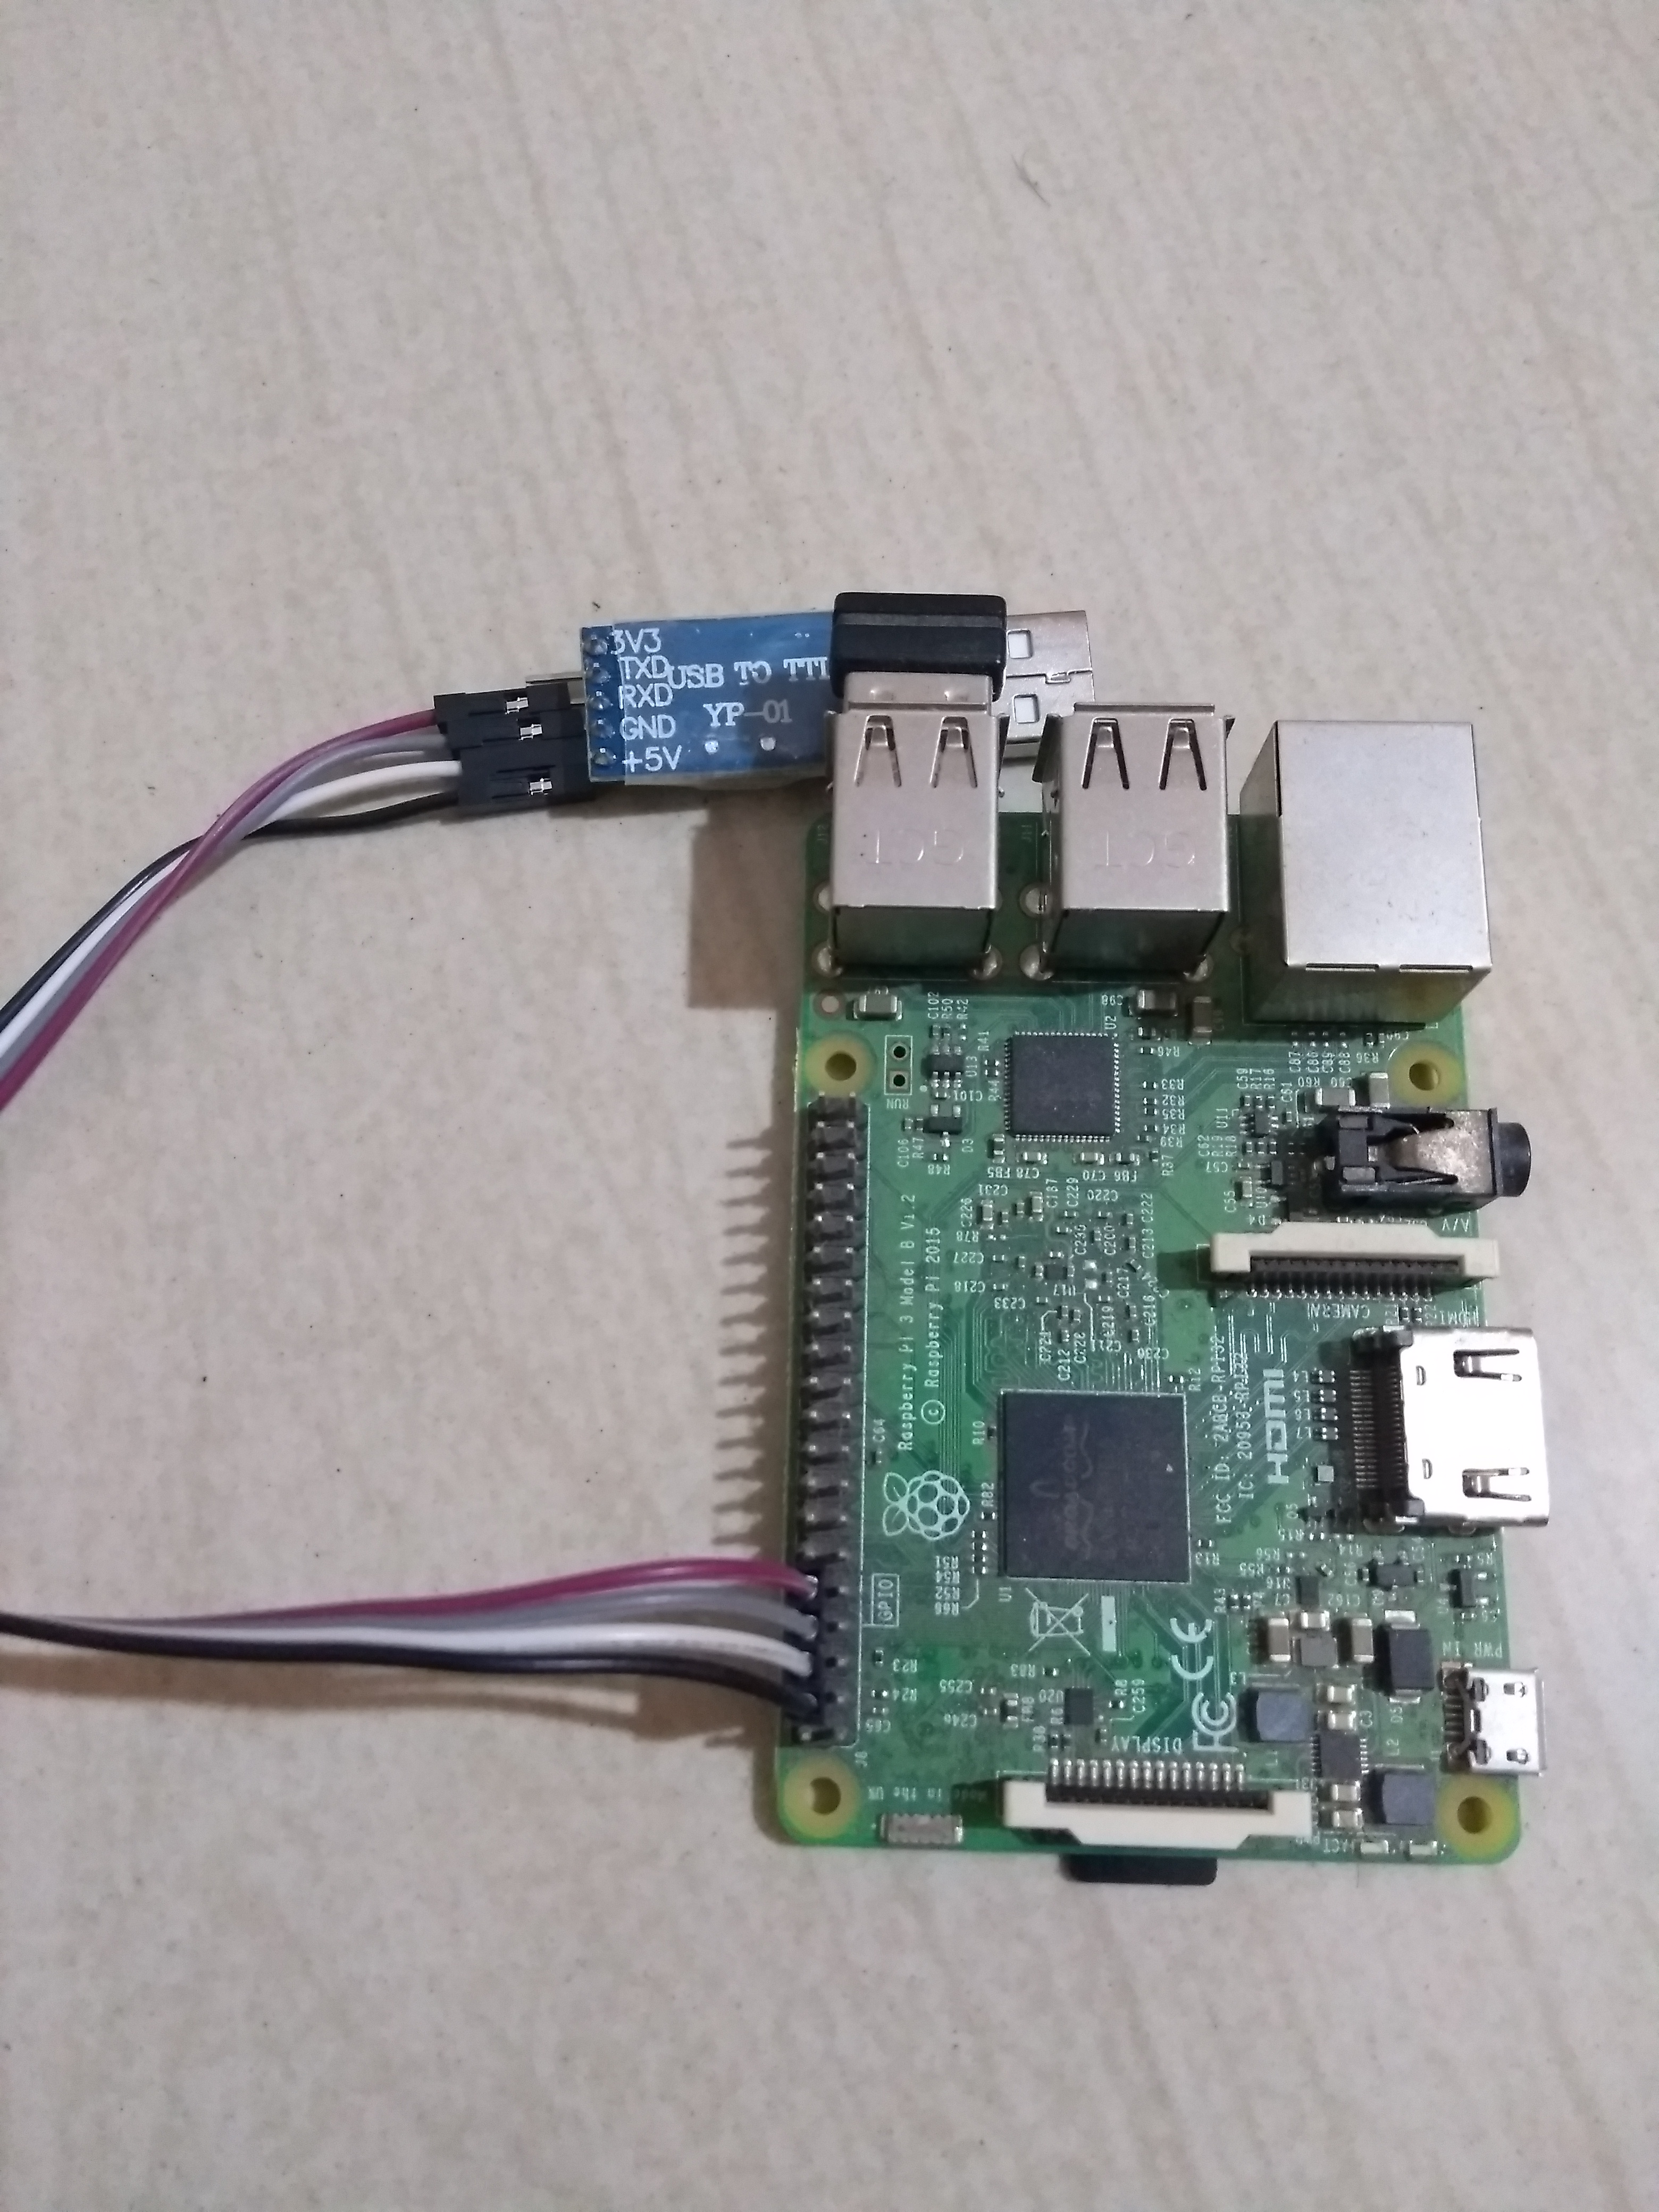 KGDB/KDB over serial with Raspberry Pi